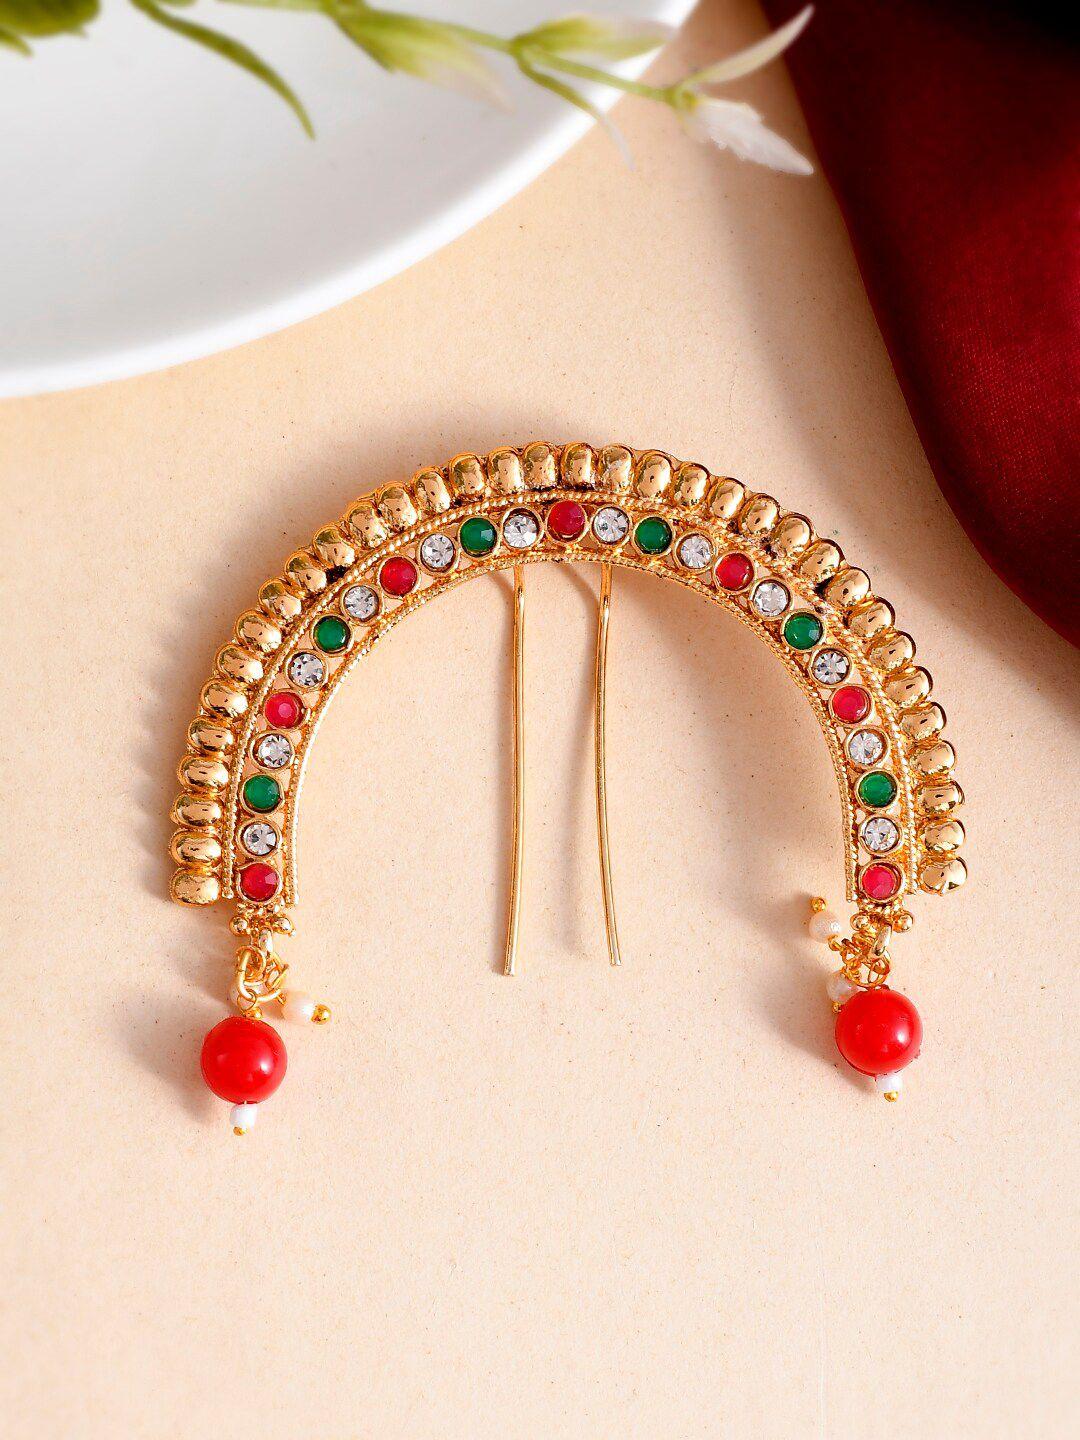 silvermerc designs women gold-plated  & red beaded hair accessory